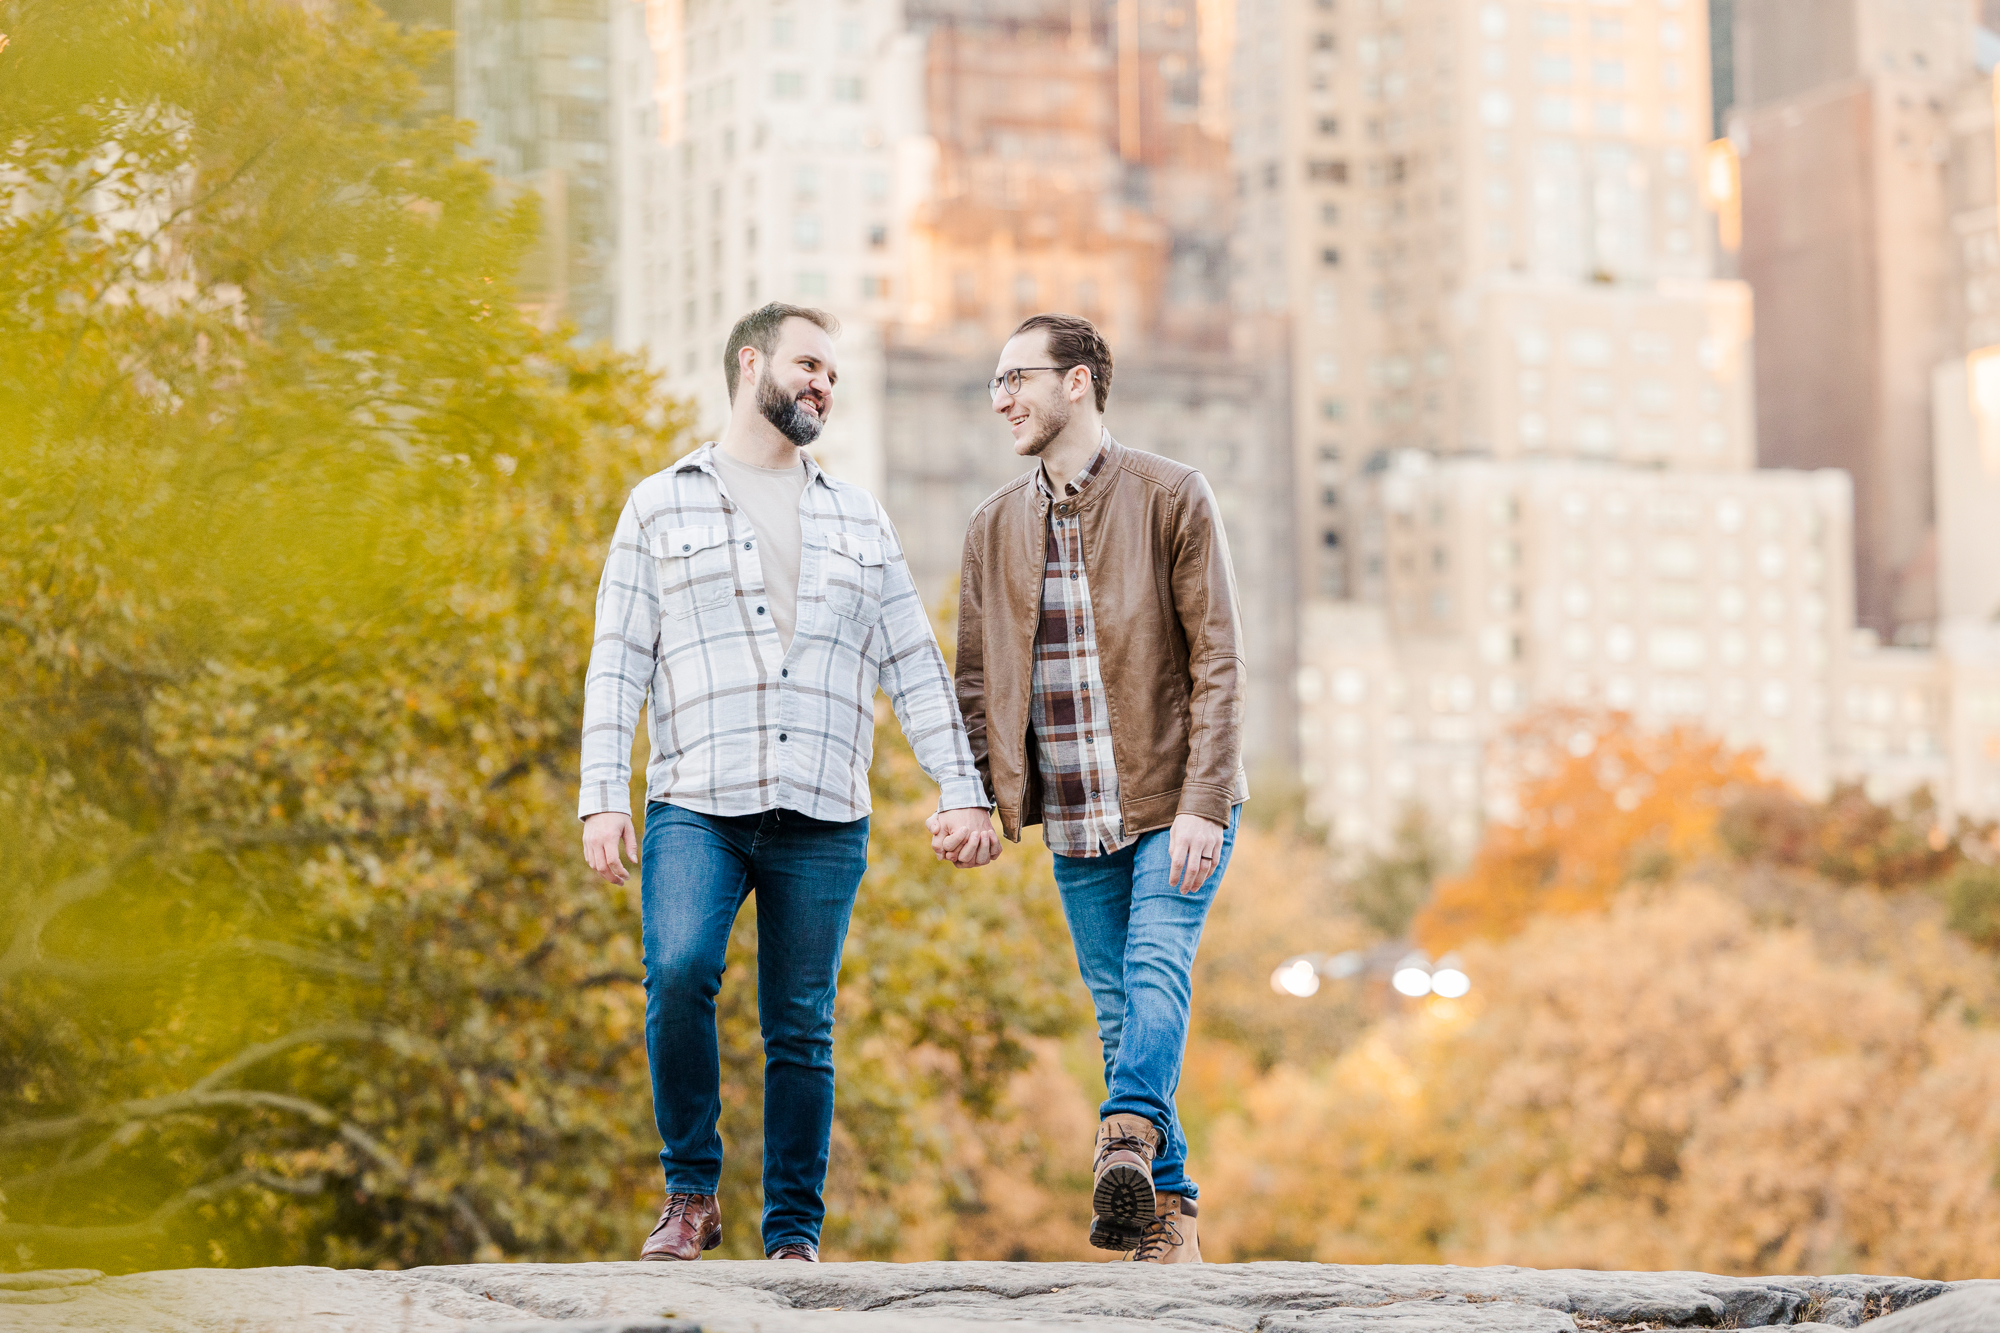 Playful Central Park Engagement Photo Shoot in Fall